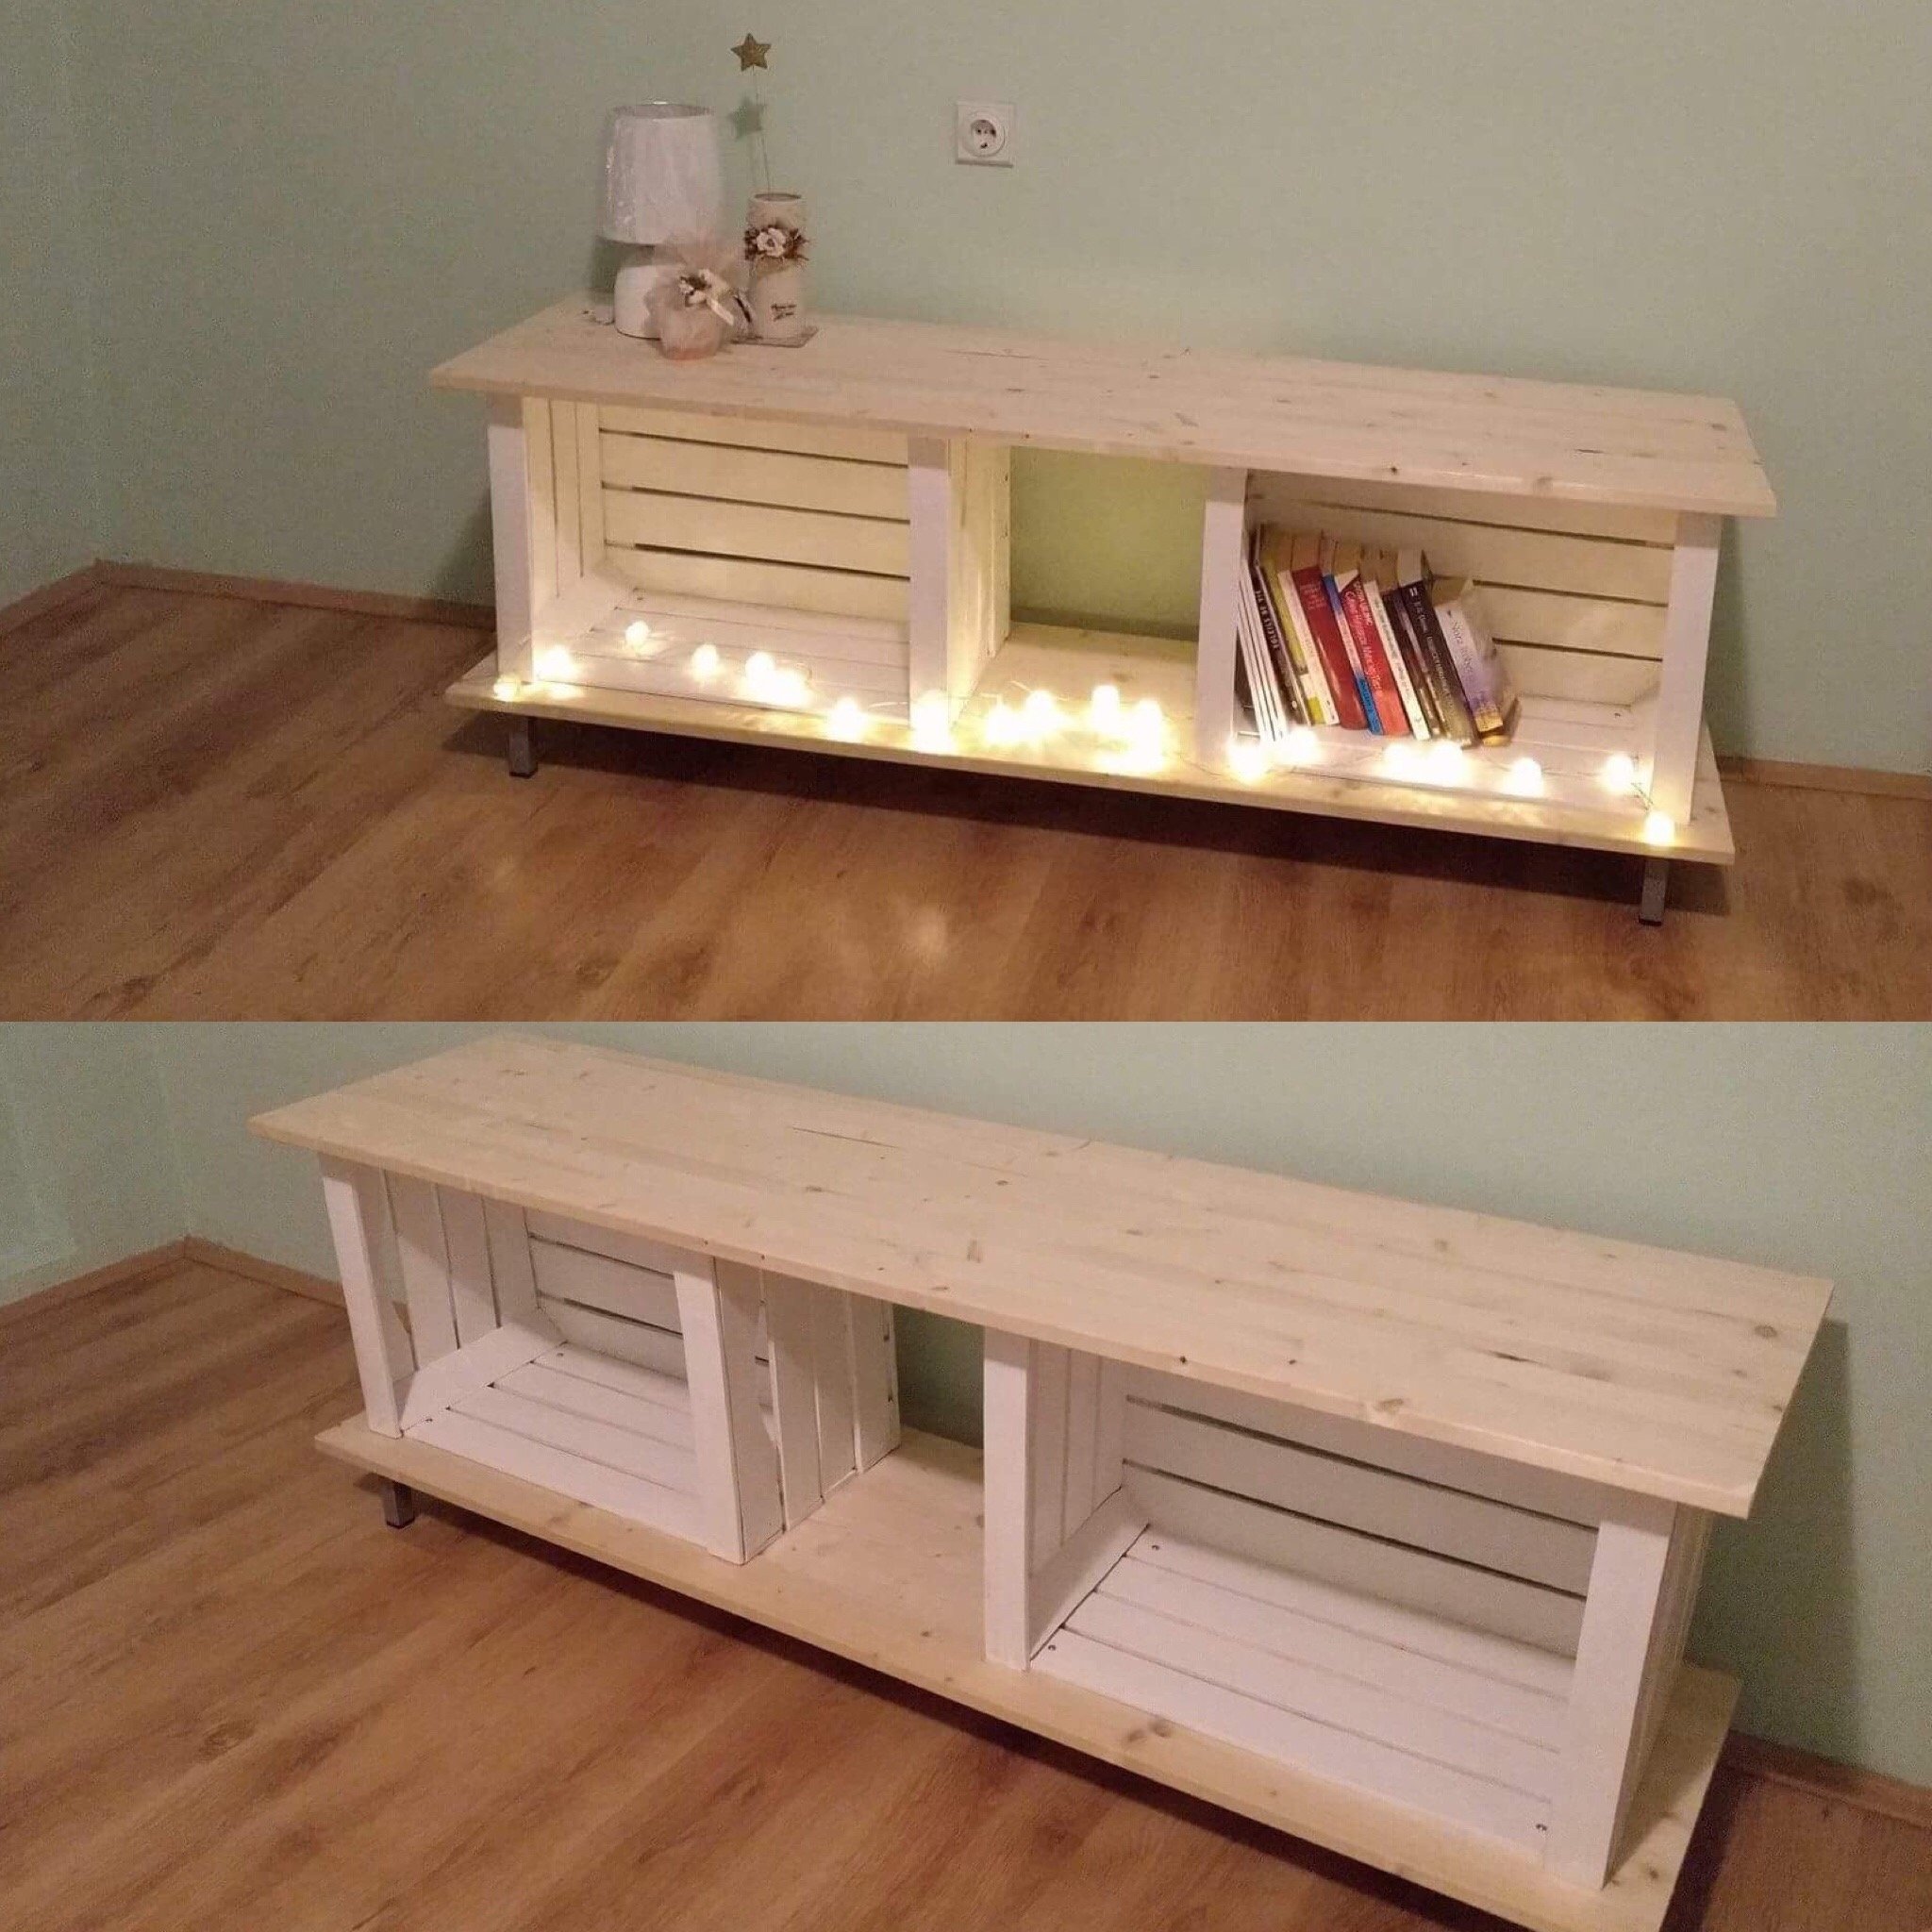 10 Amazing Do It Yourself Furniture Ideas our first diy project wooden crates pinterest inspired tv stand 2022